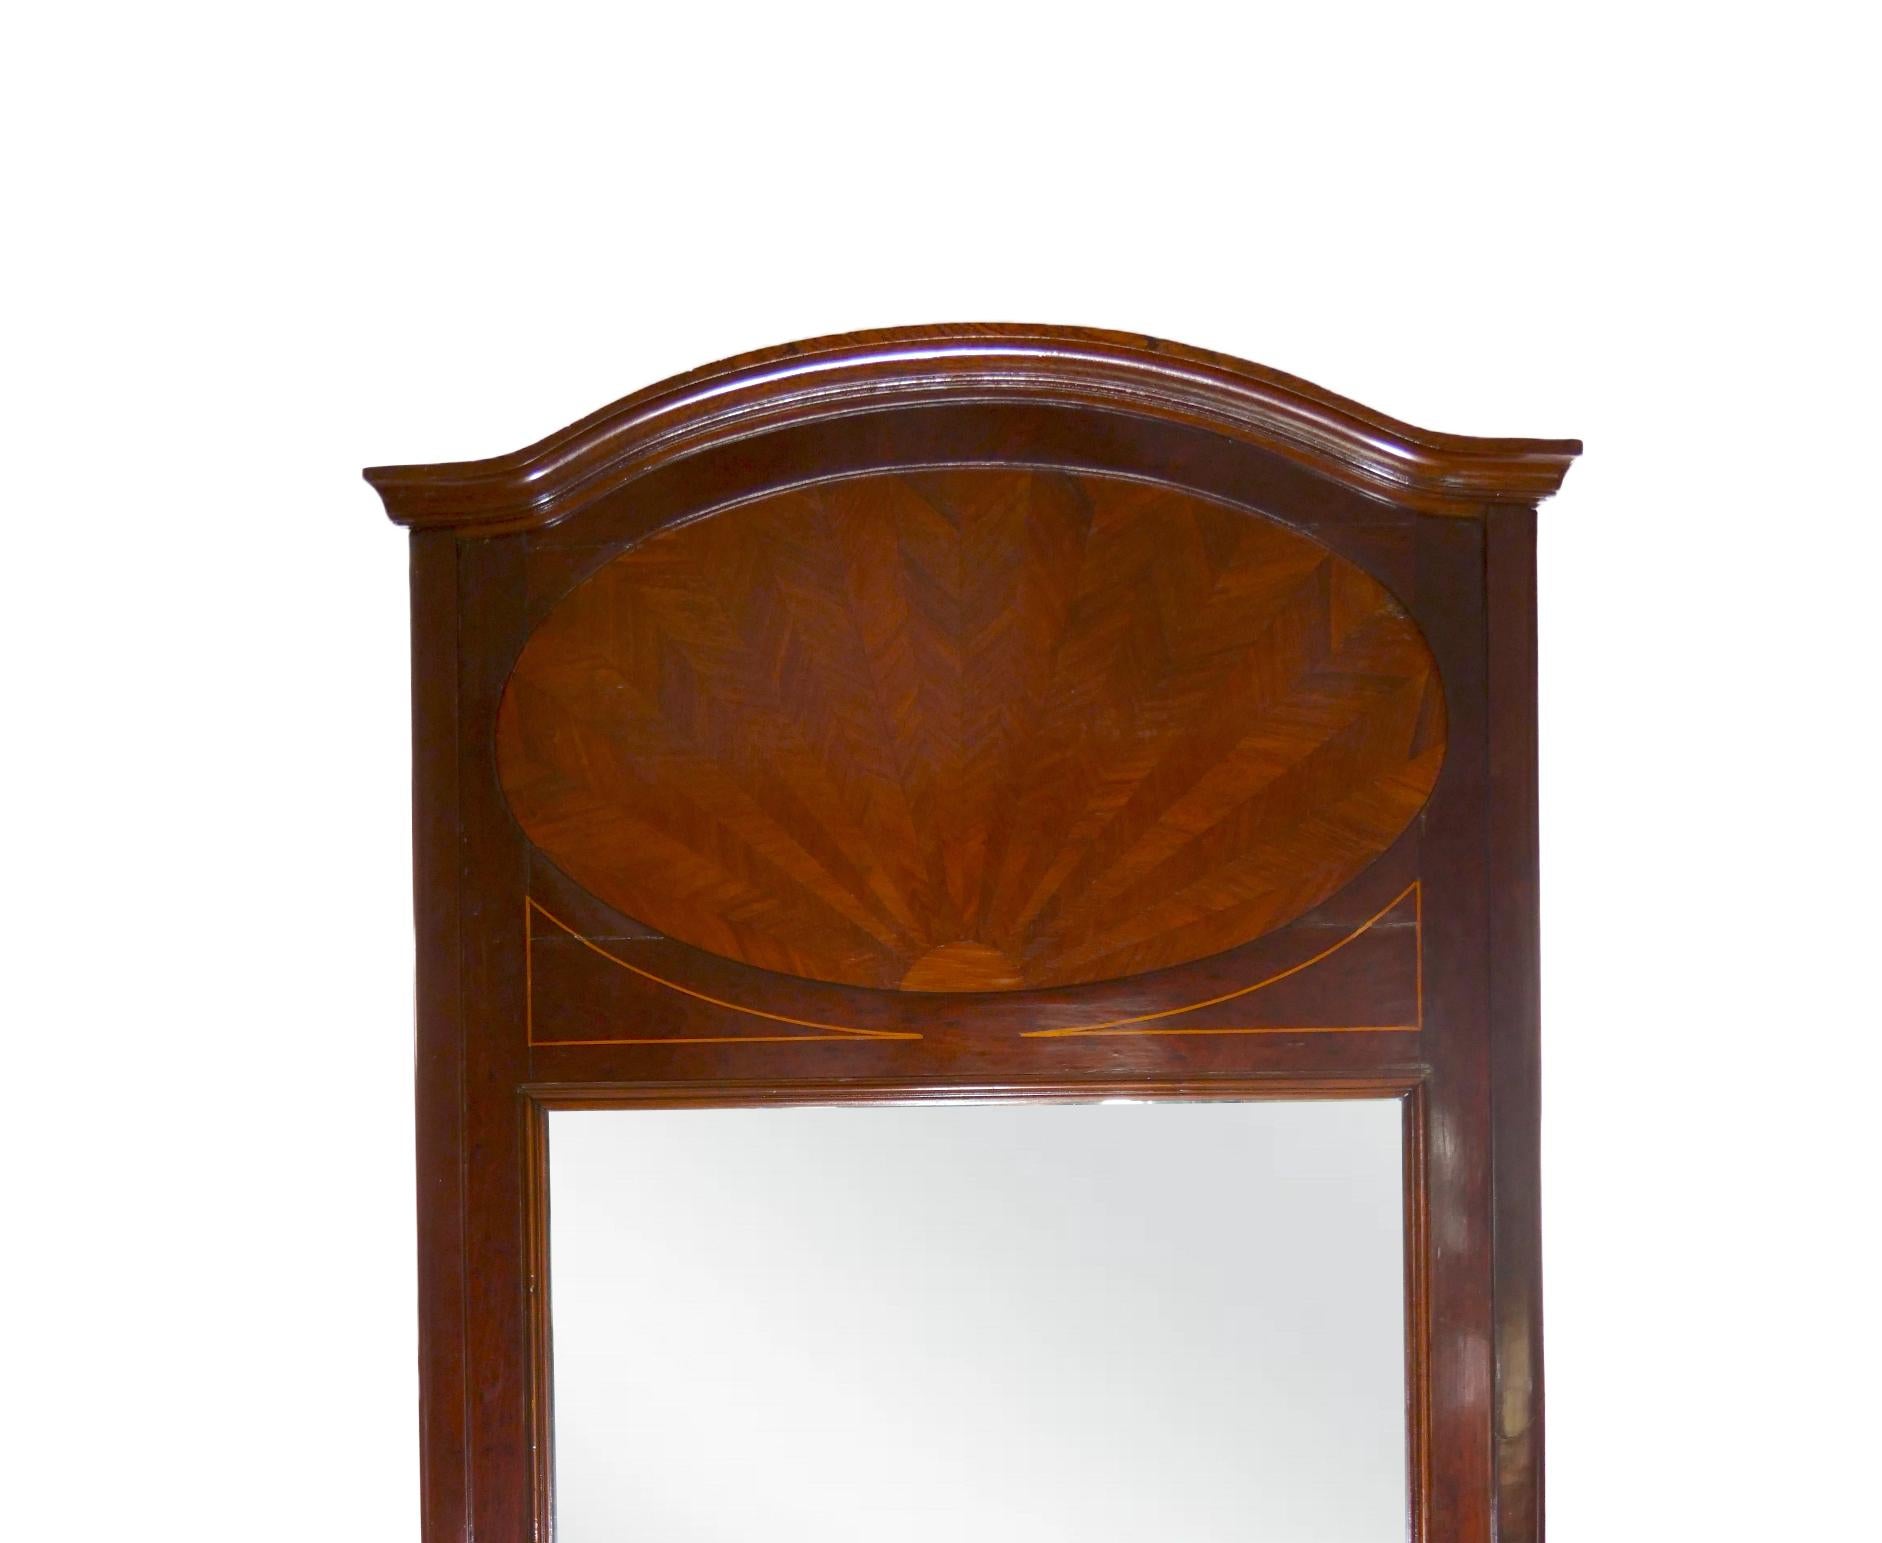 Beautiful craftsmanship of the mid-19th century beveled mahogany wood frame hanging trumeau wall mirror with inlaid top design details. The mirror is in great condition with appropriate wear consistent with age / use. It measures 72 inches high X 40